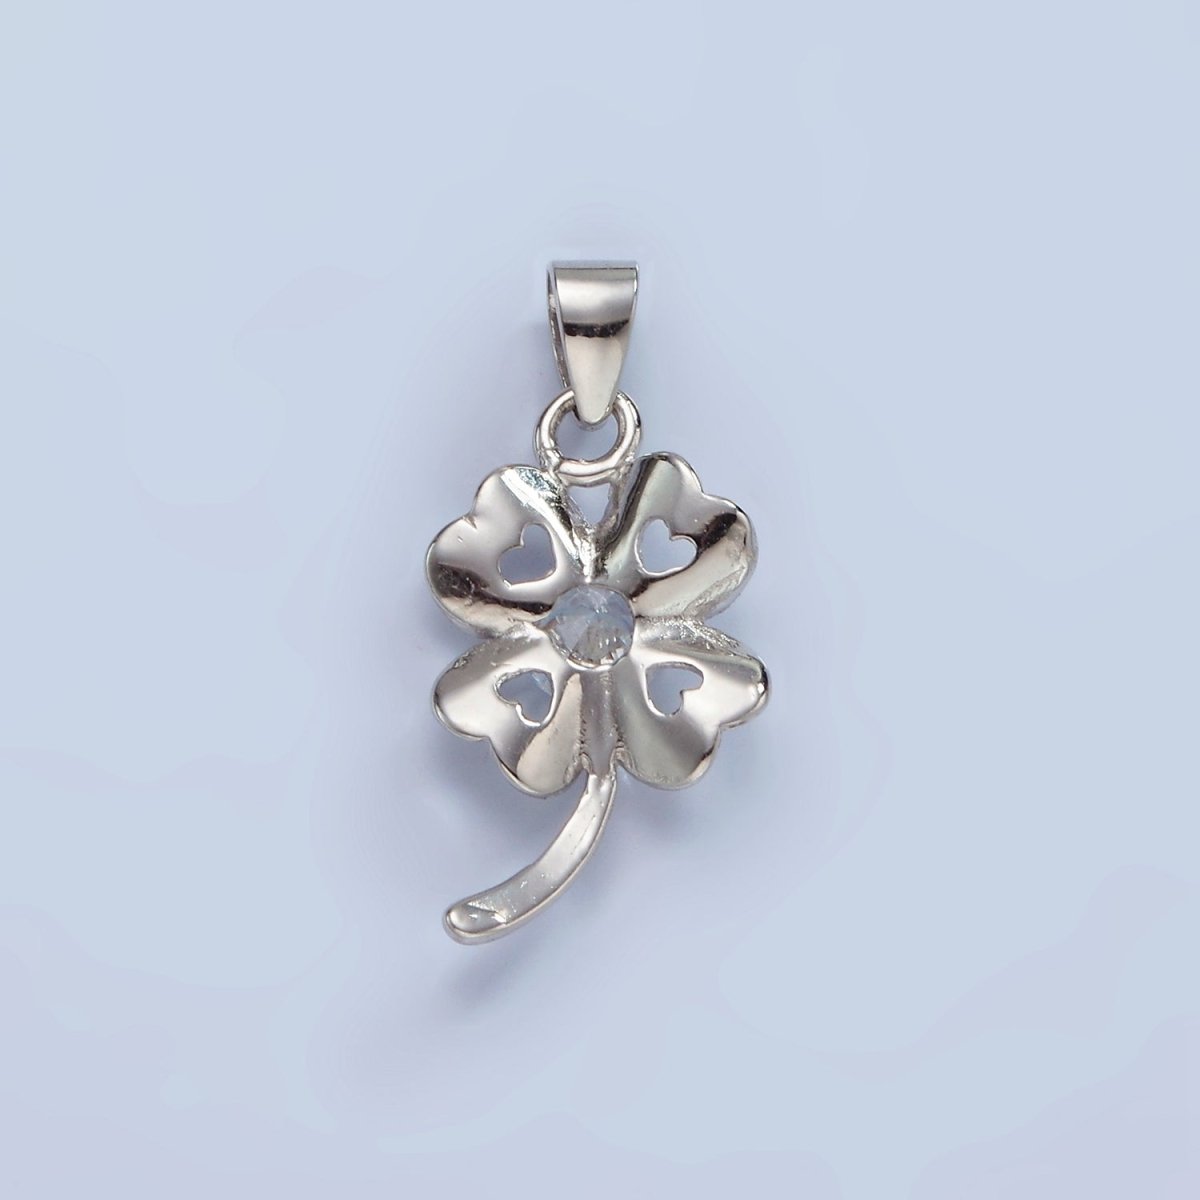 S925 Sterling Silver Clover Pendant Lucky Charm with Cz Stone | SL-471 - DLUXCA